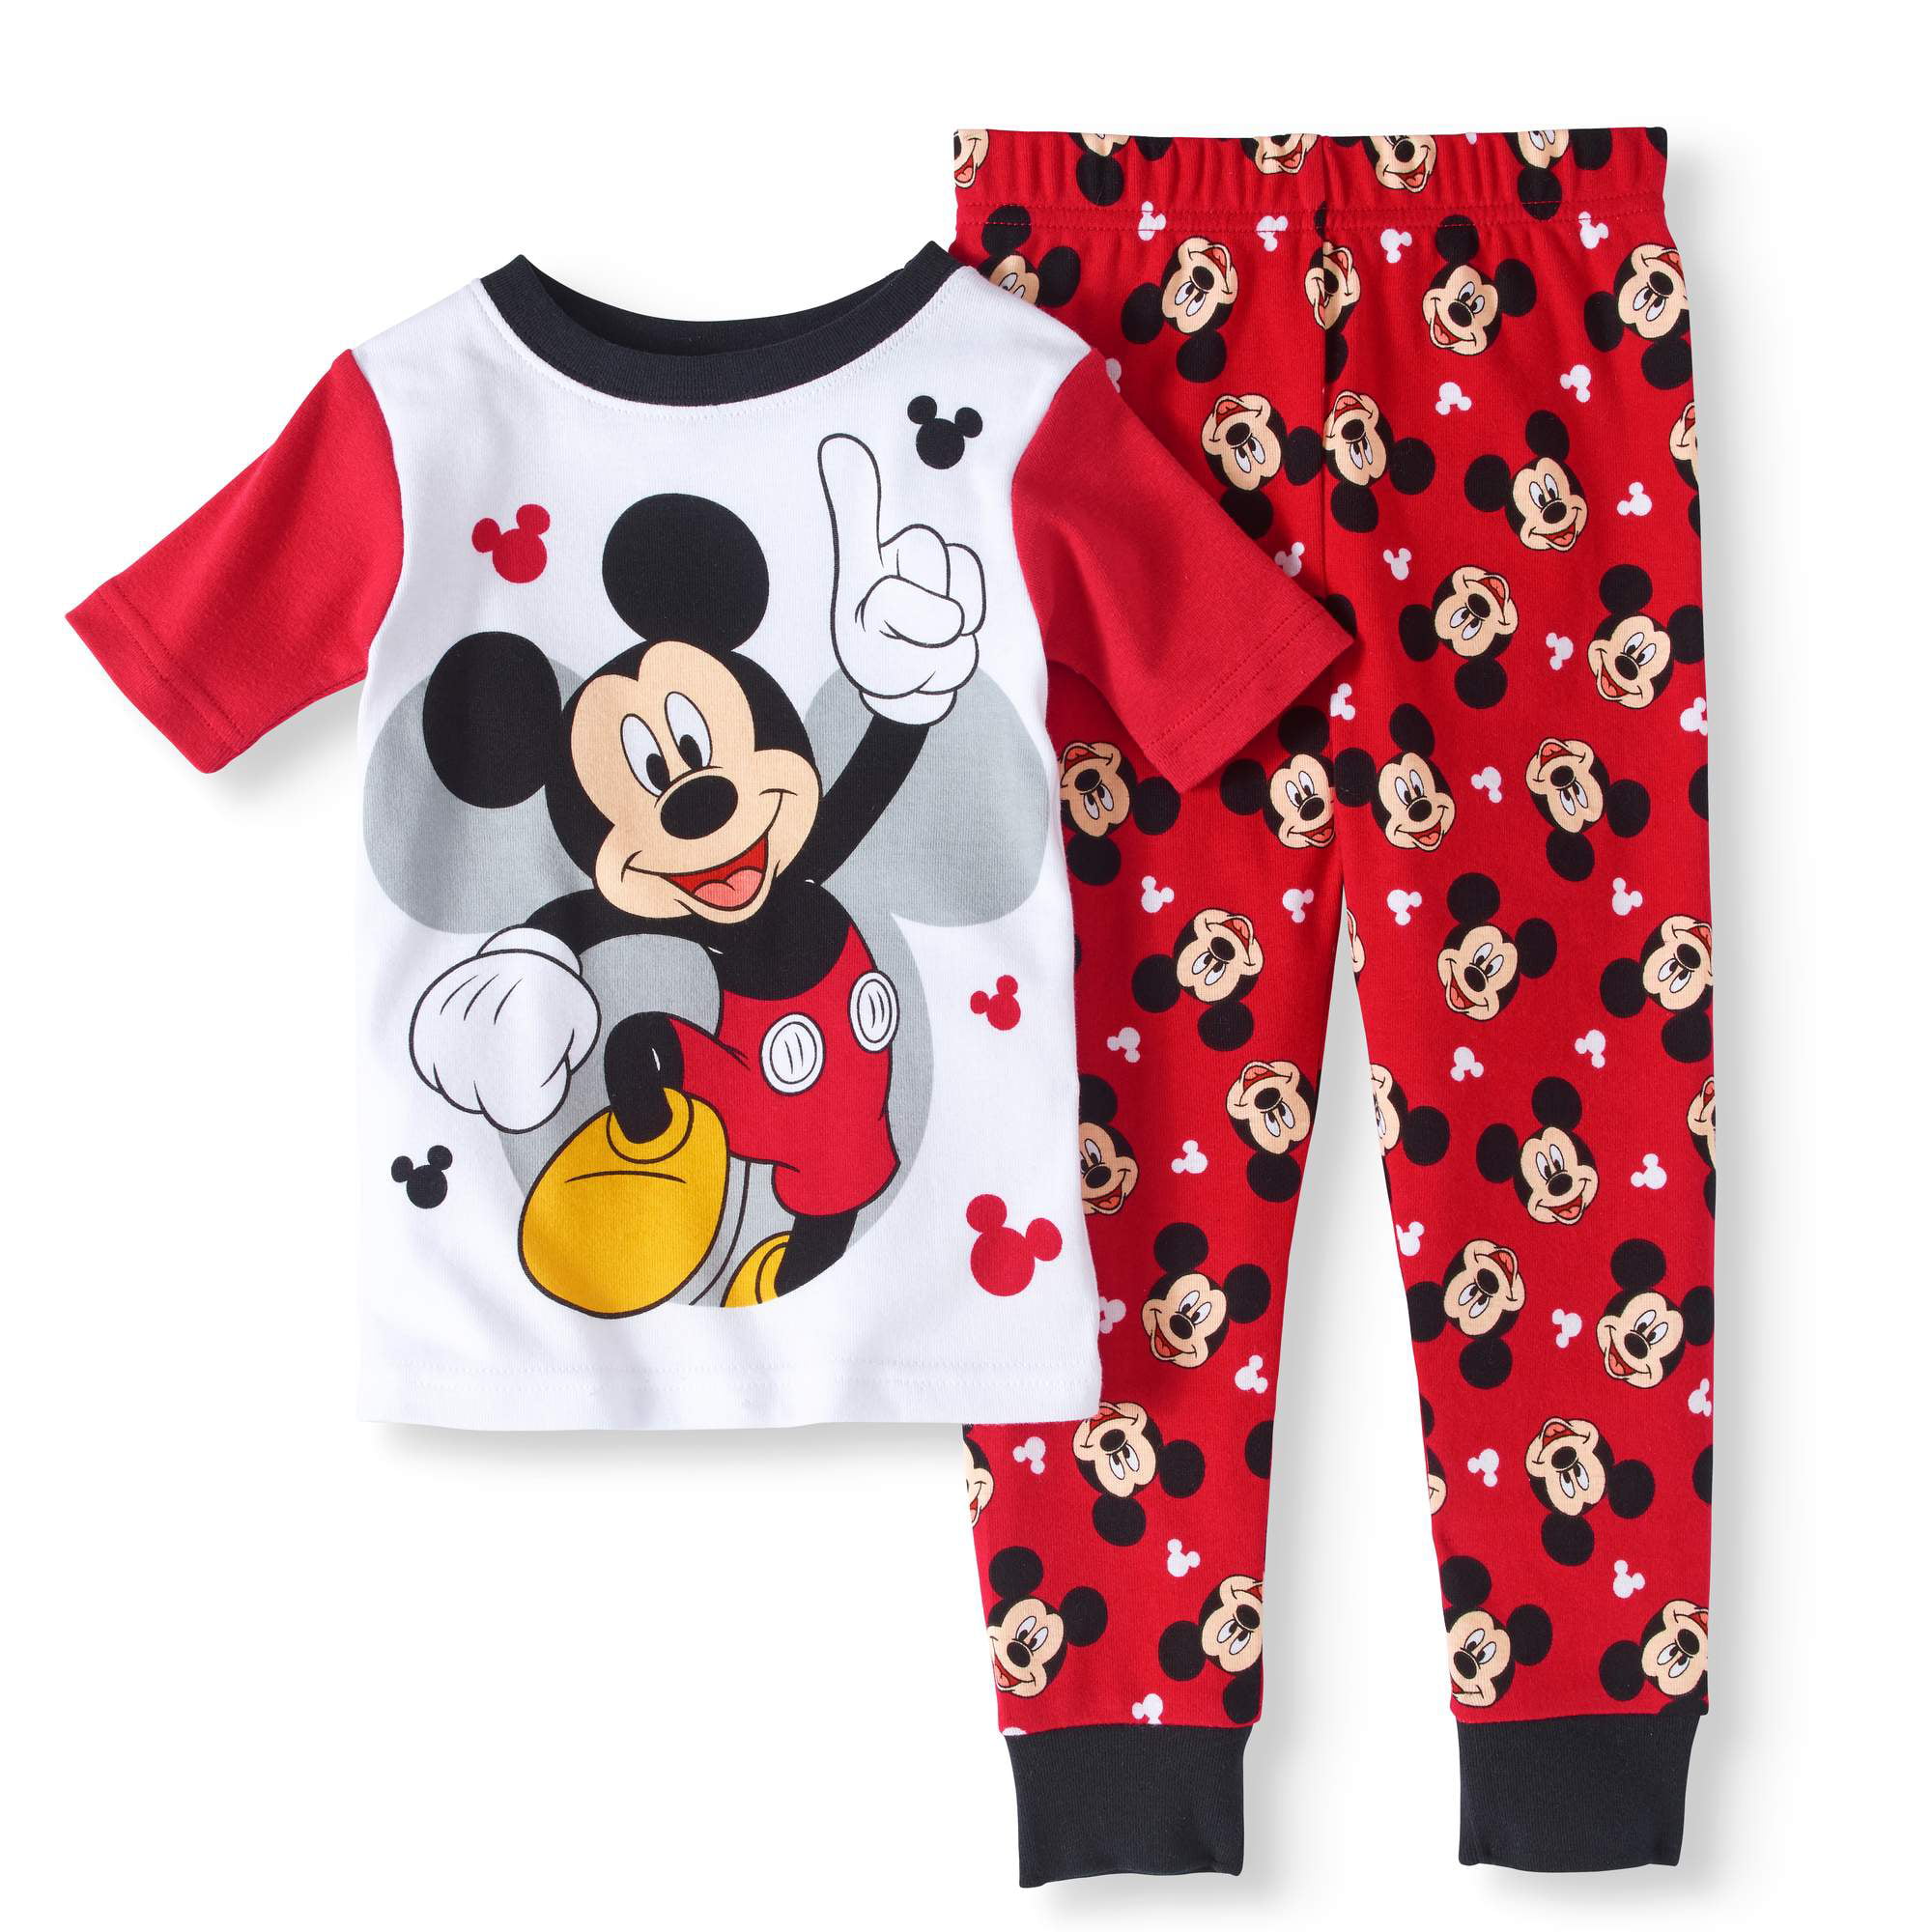 Mickey mouse pjs